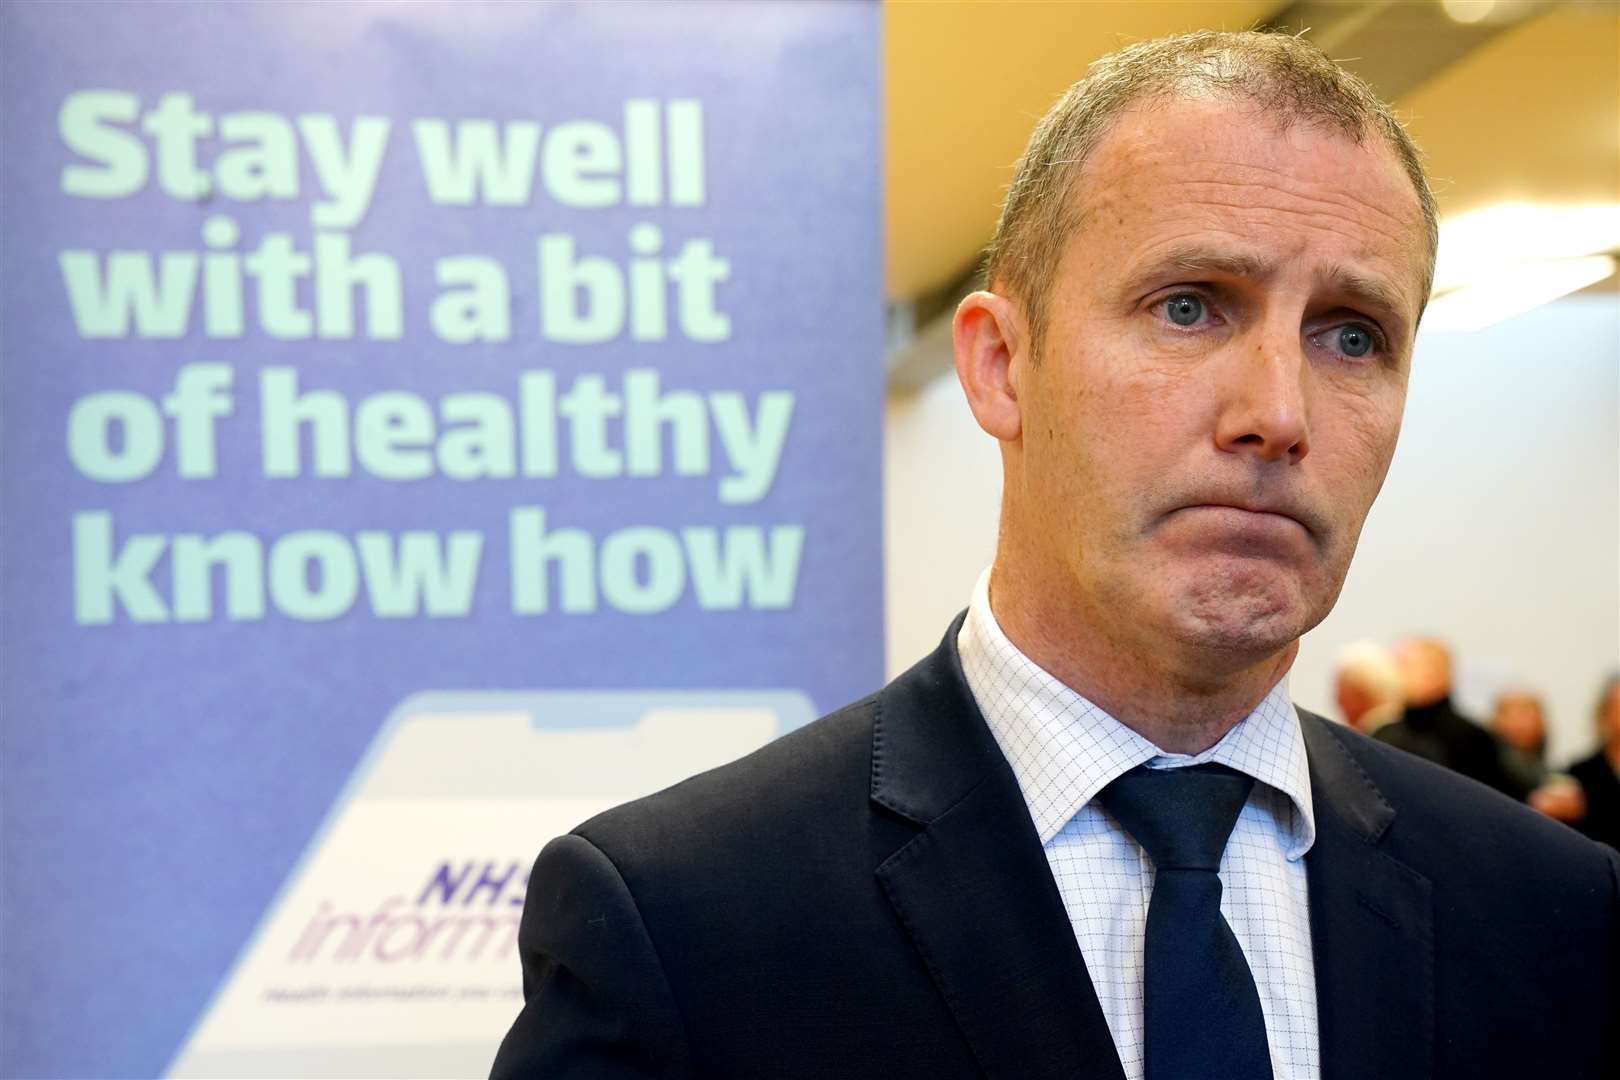 Michael Matheson resigned as health secretary amid the fallout from the row (PA)